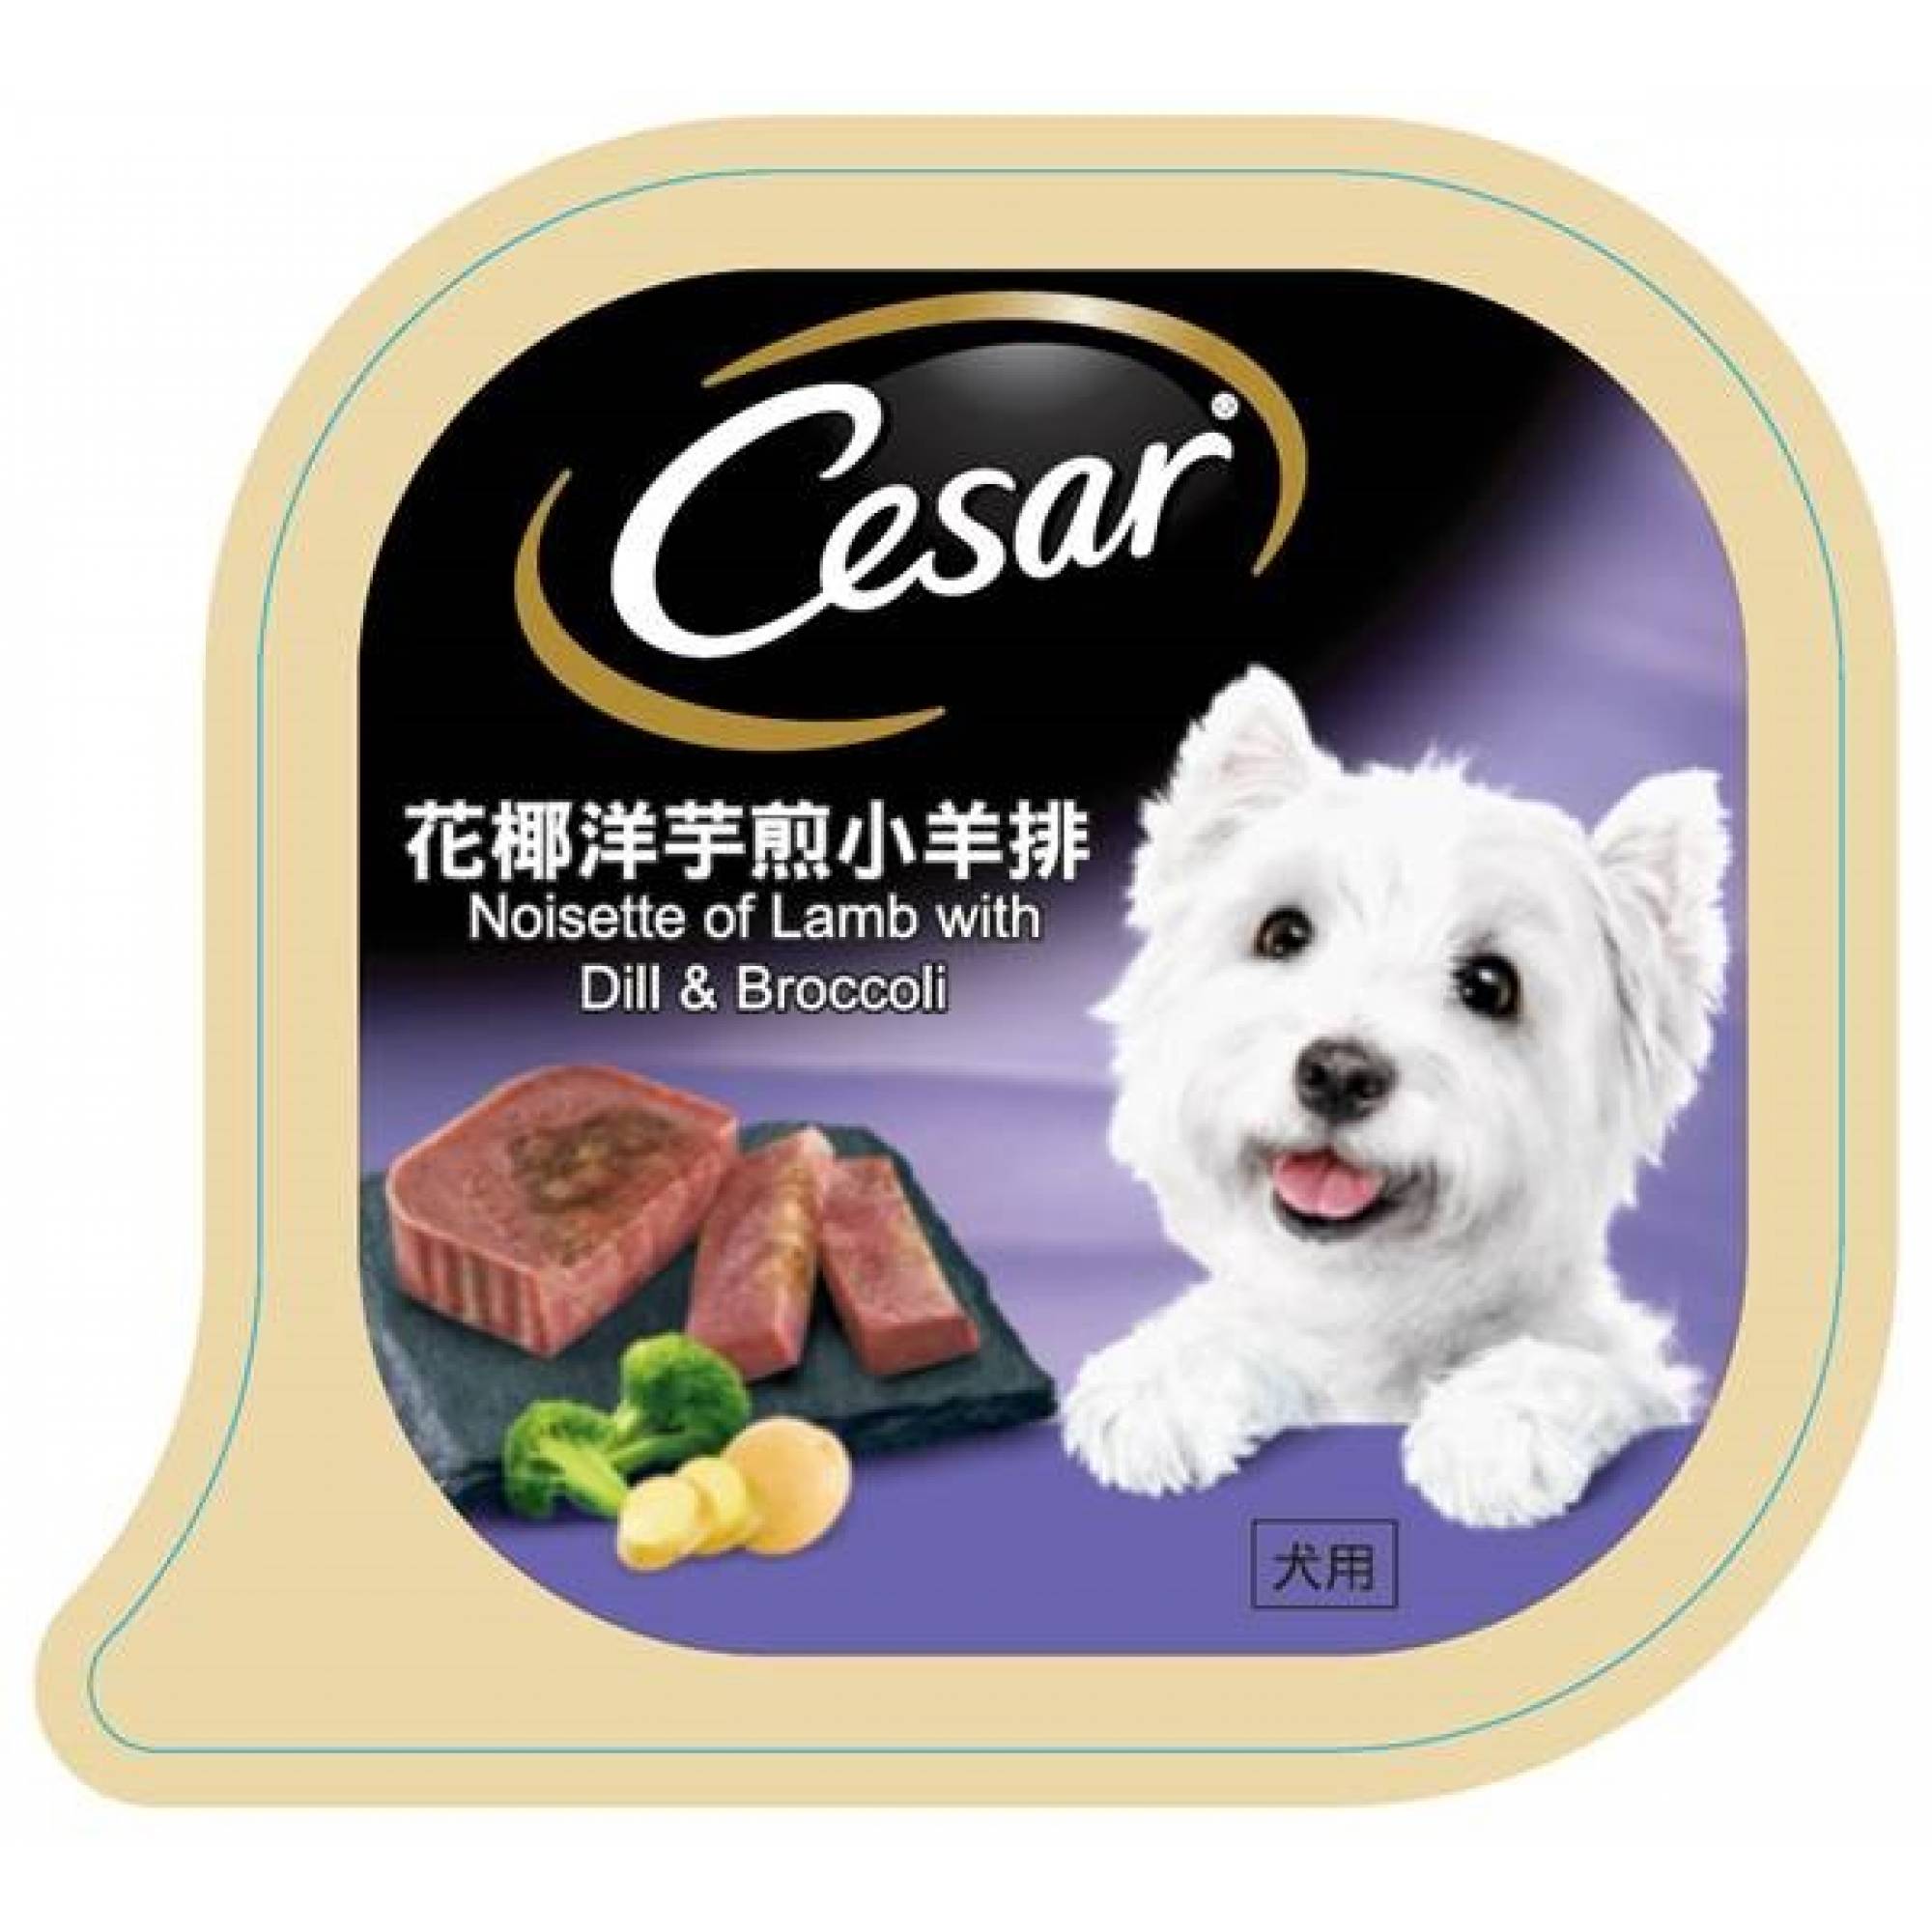 Cesar - Noisette of Lamb with Dill & Broccoli Pate Dog Food 100g